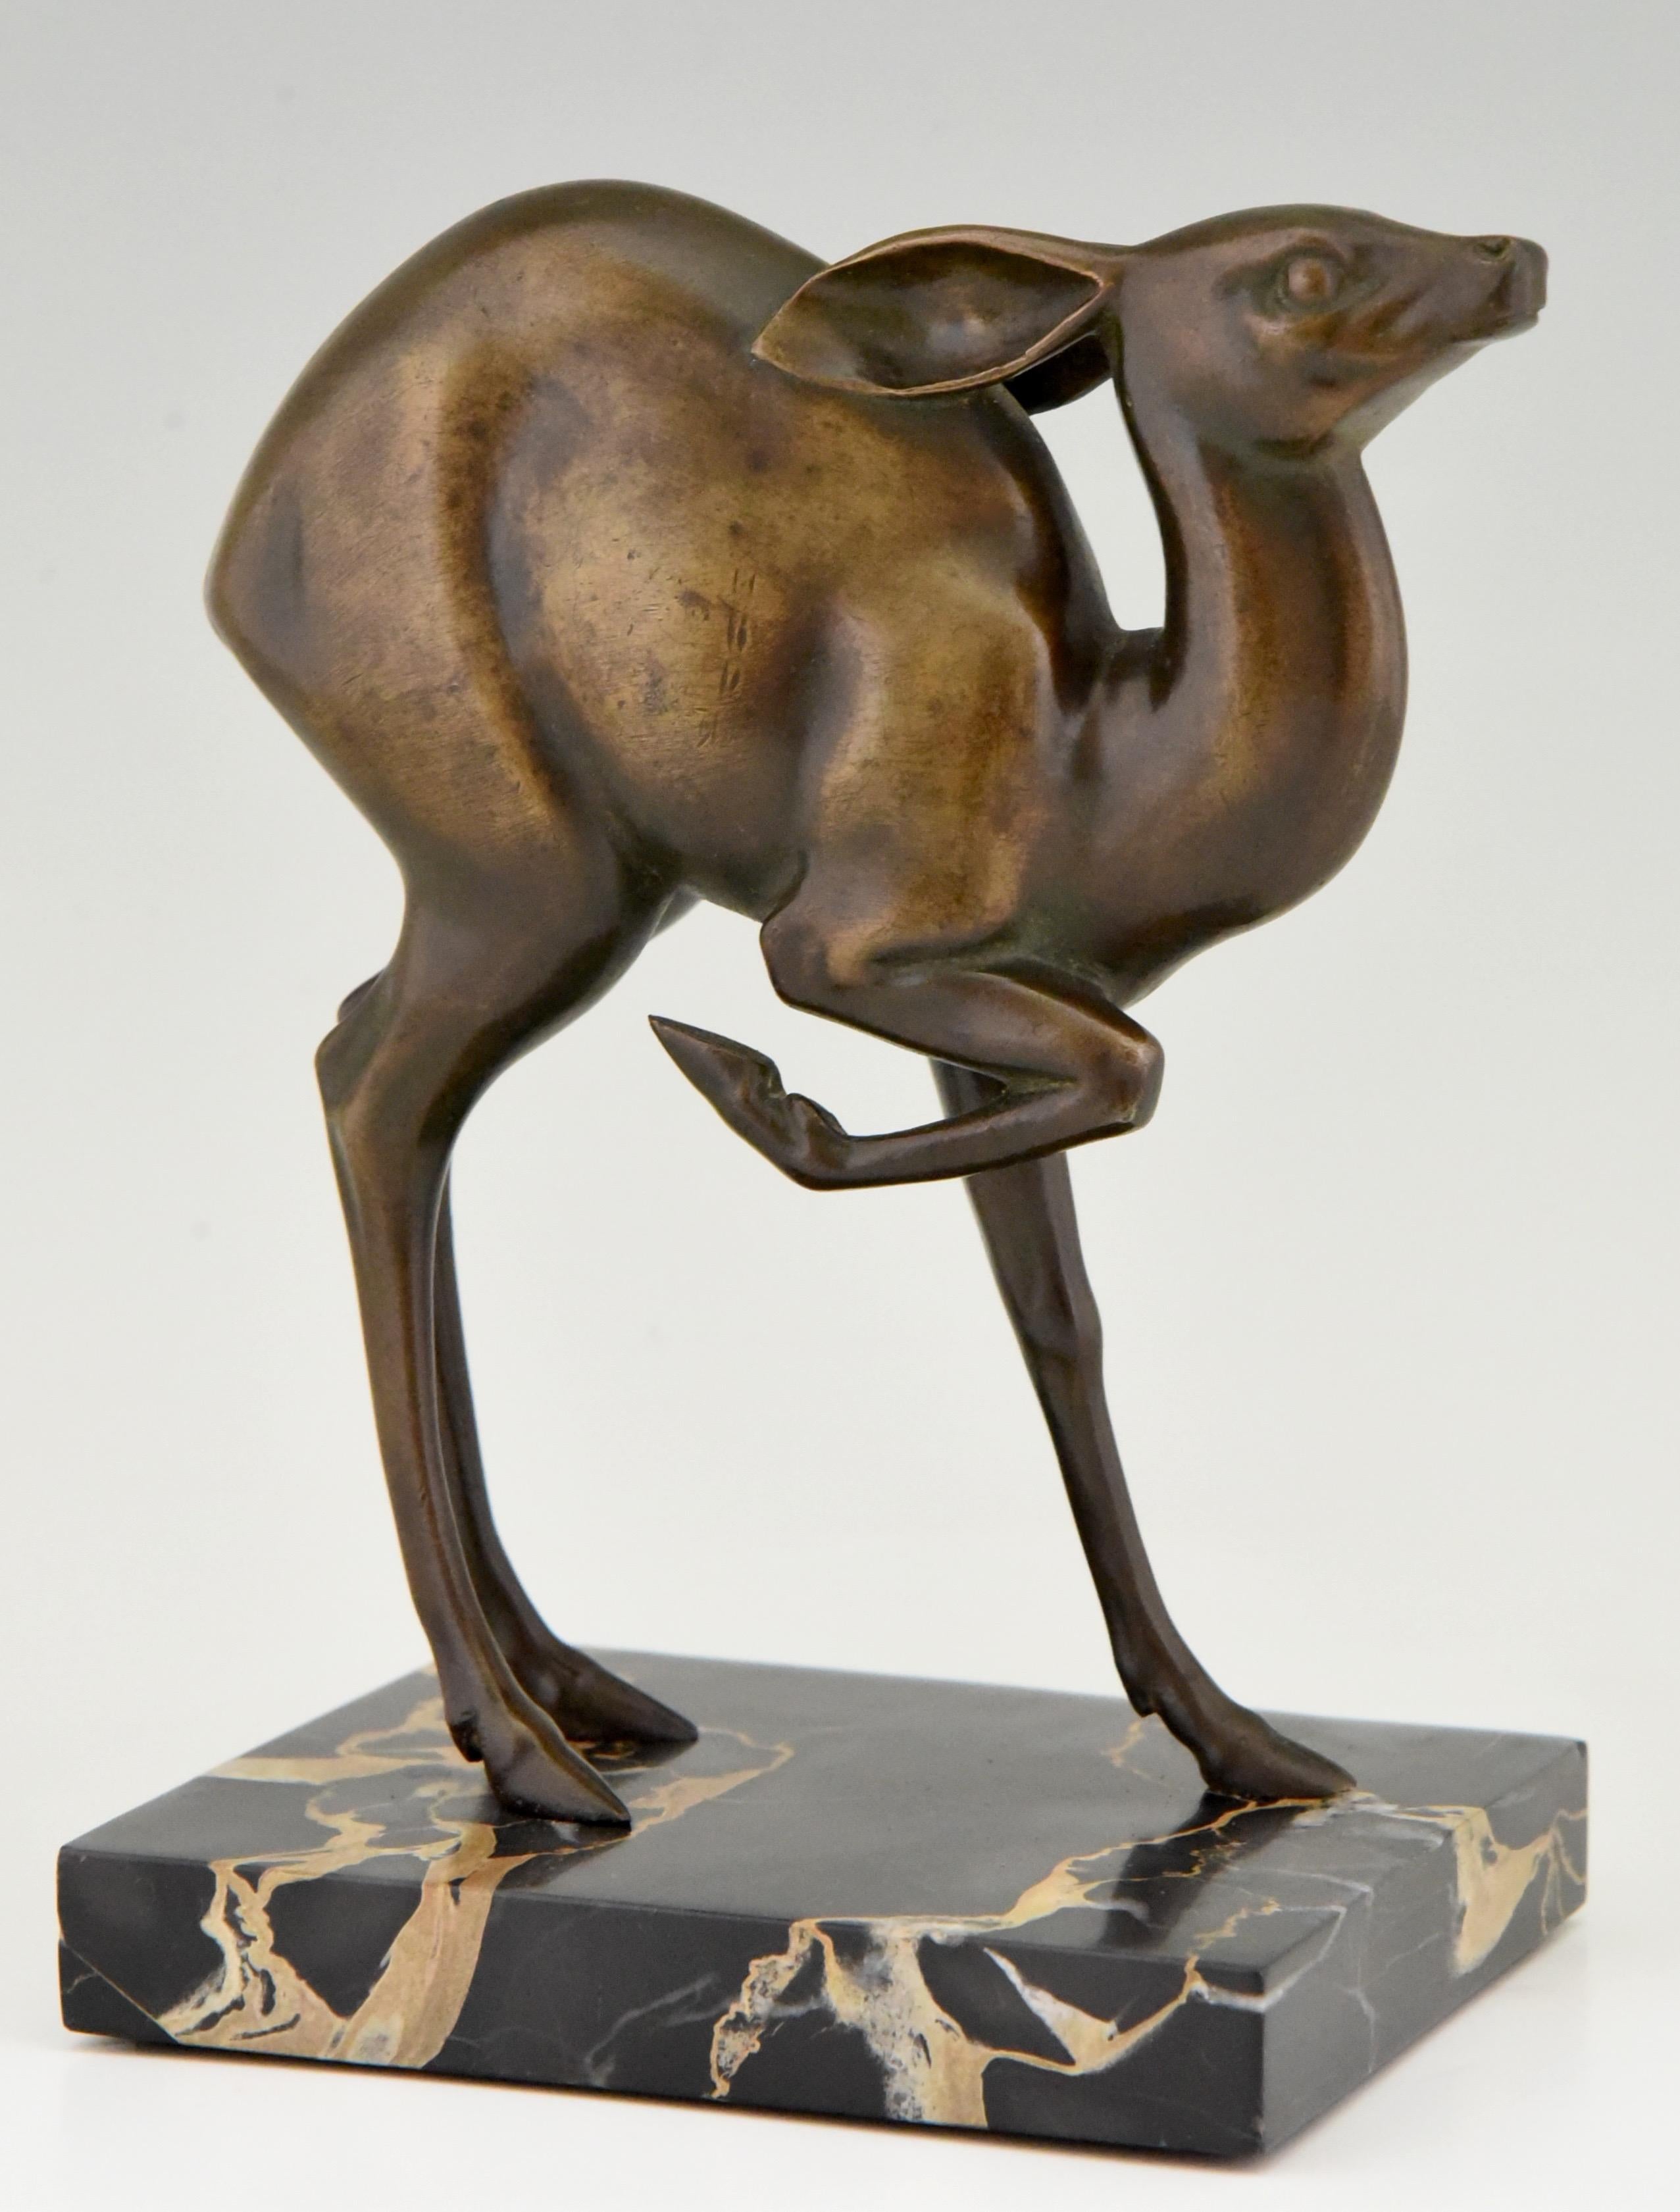 Art Deco bronze sculpture of a deer by the French artist Rischmann.
The sculpture has a beautiful patina and stands on a Portor marble plinth,
circa 1925.  

This bronze is illustrated in? “Art Deco sculpture and metalware” by ?Alfred W. Edward.